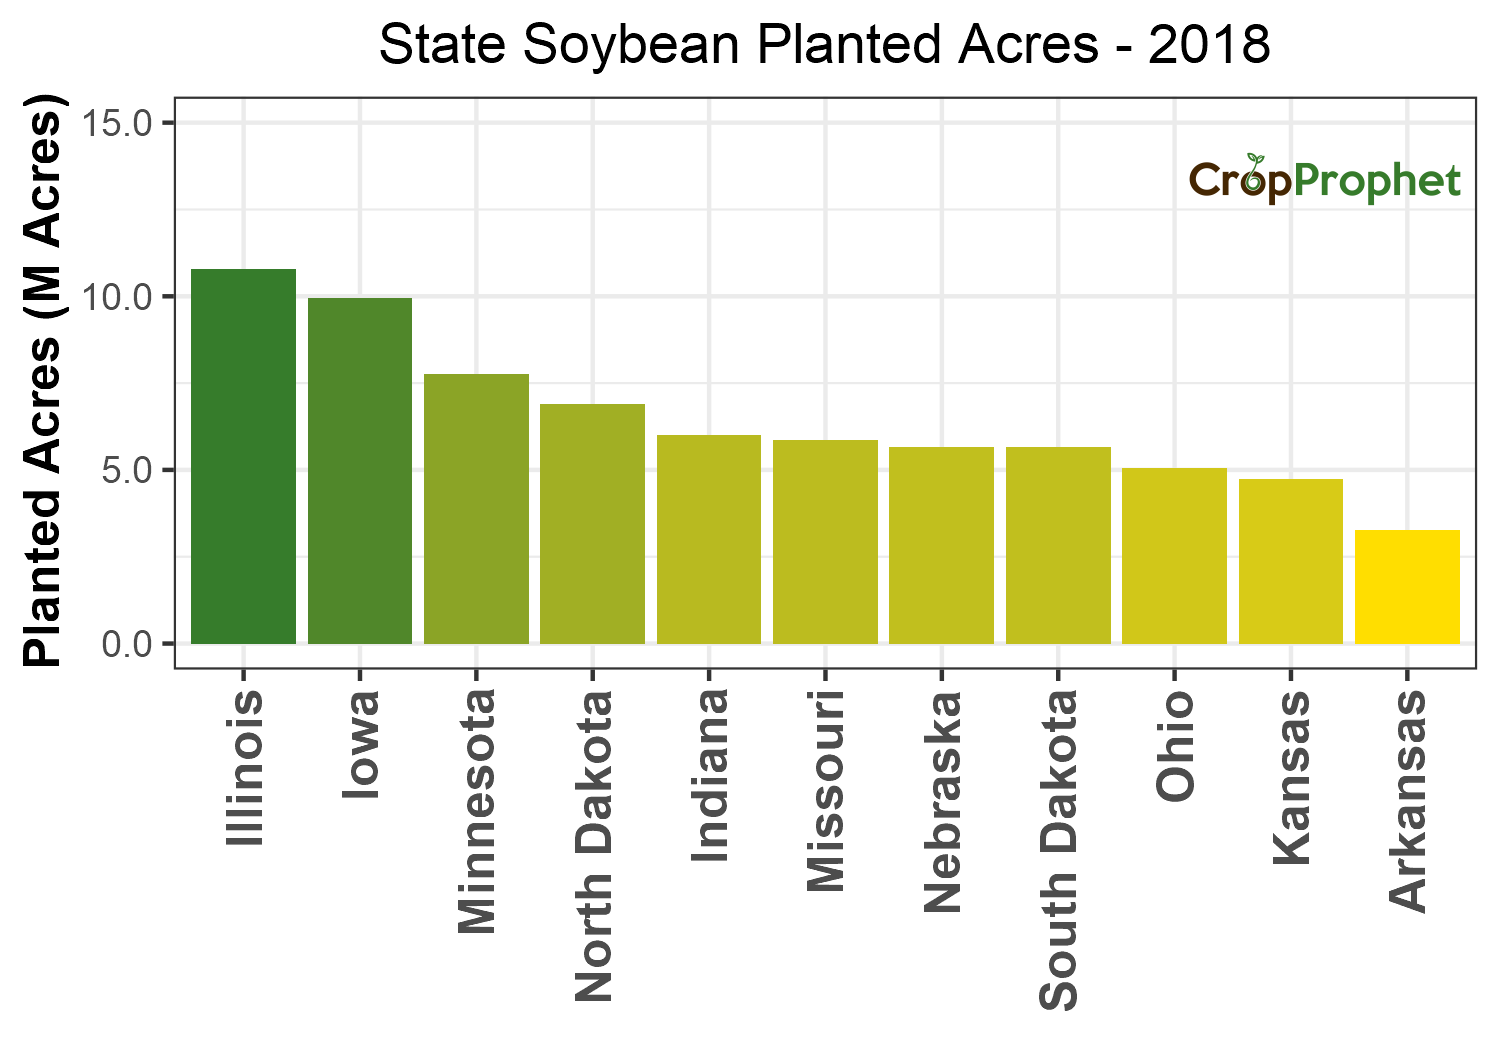 Soybean Production by State - 2018 Rankings